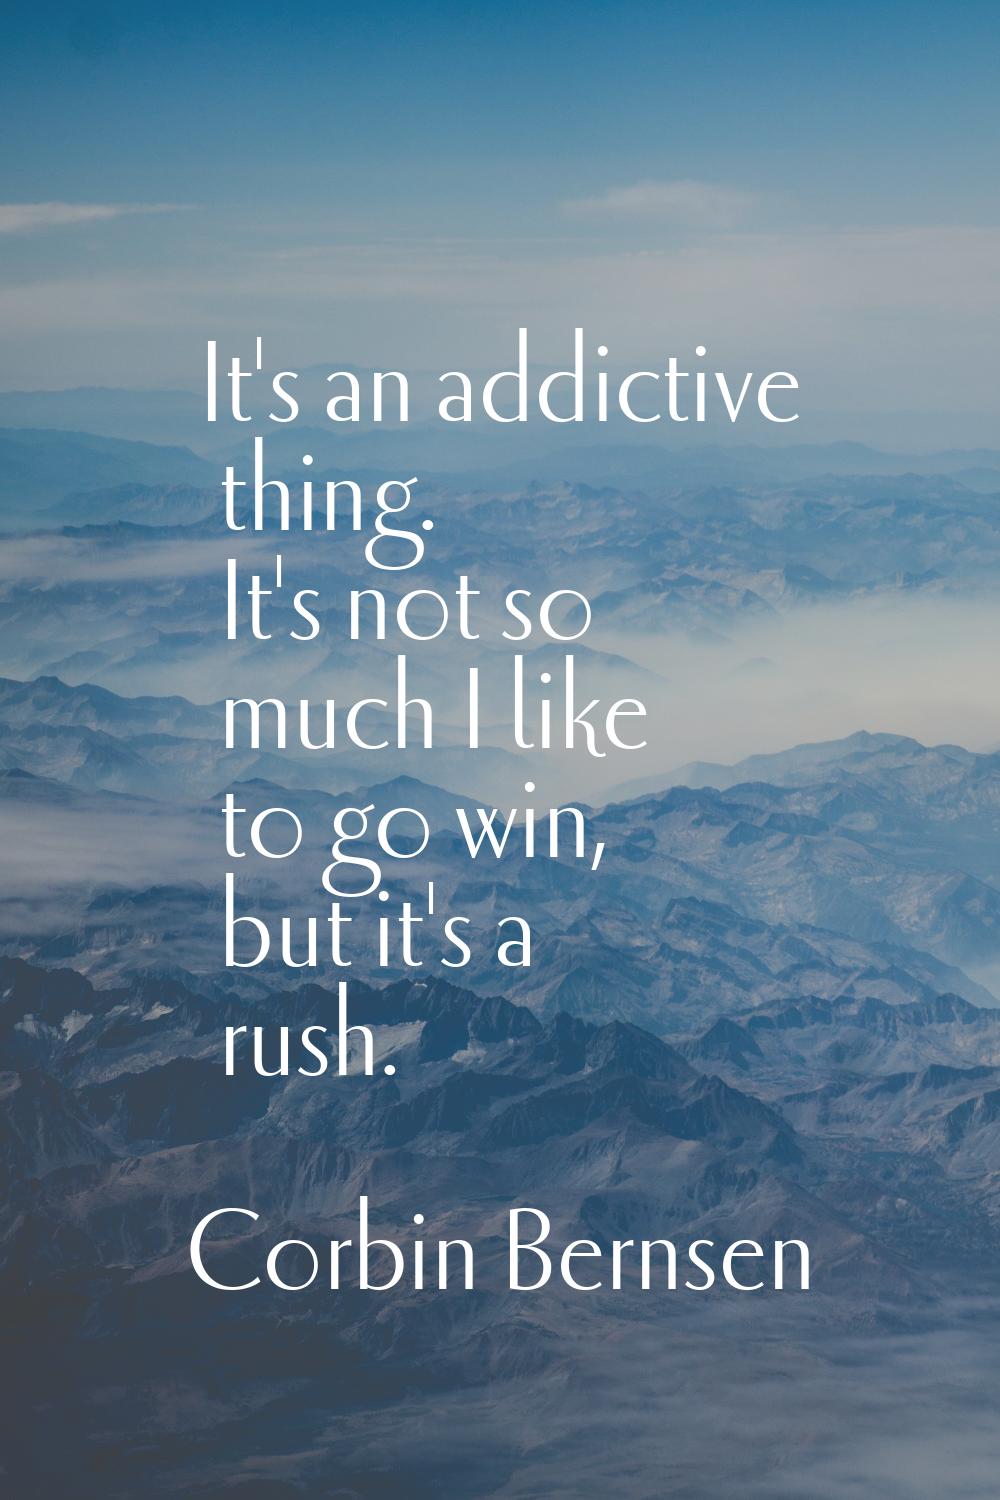 It's an addictive thing. It's not so much I like to go win, but it's a rush.